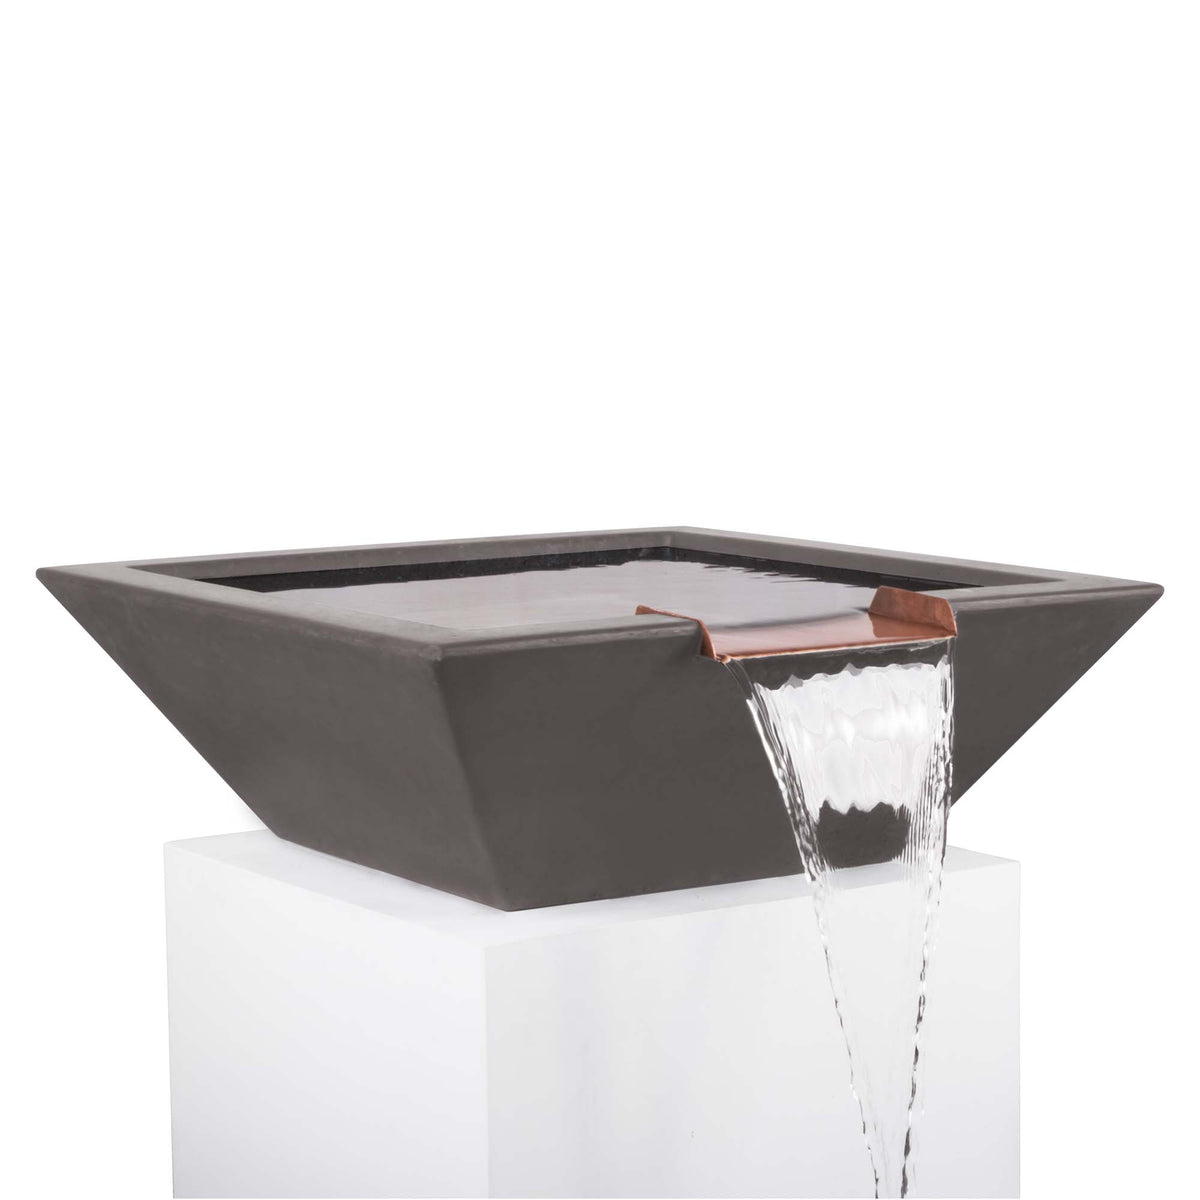 The Outdoor Plus Maya GFRC Concrete Square Water Bowl in Chestnut